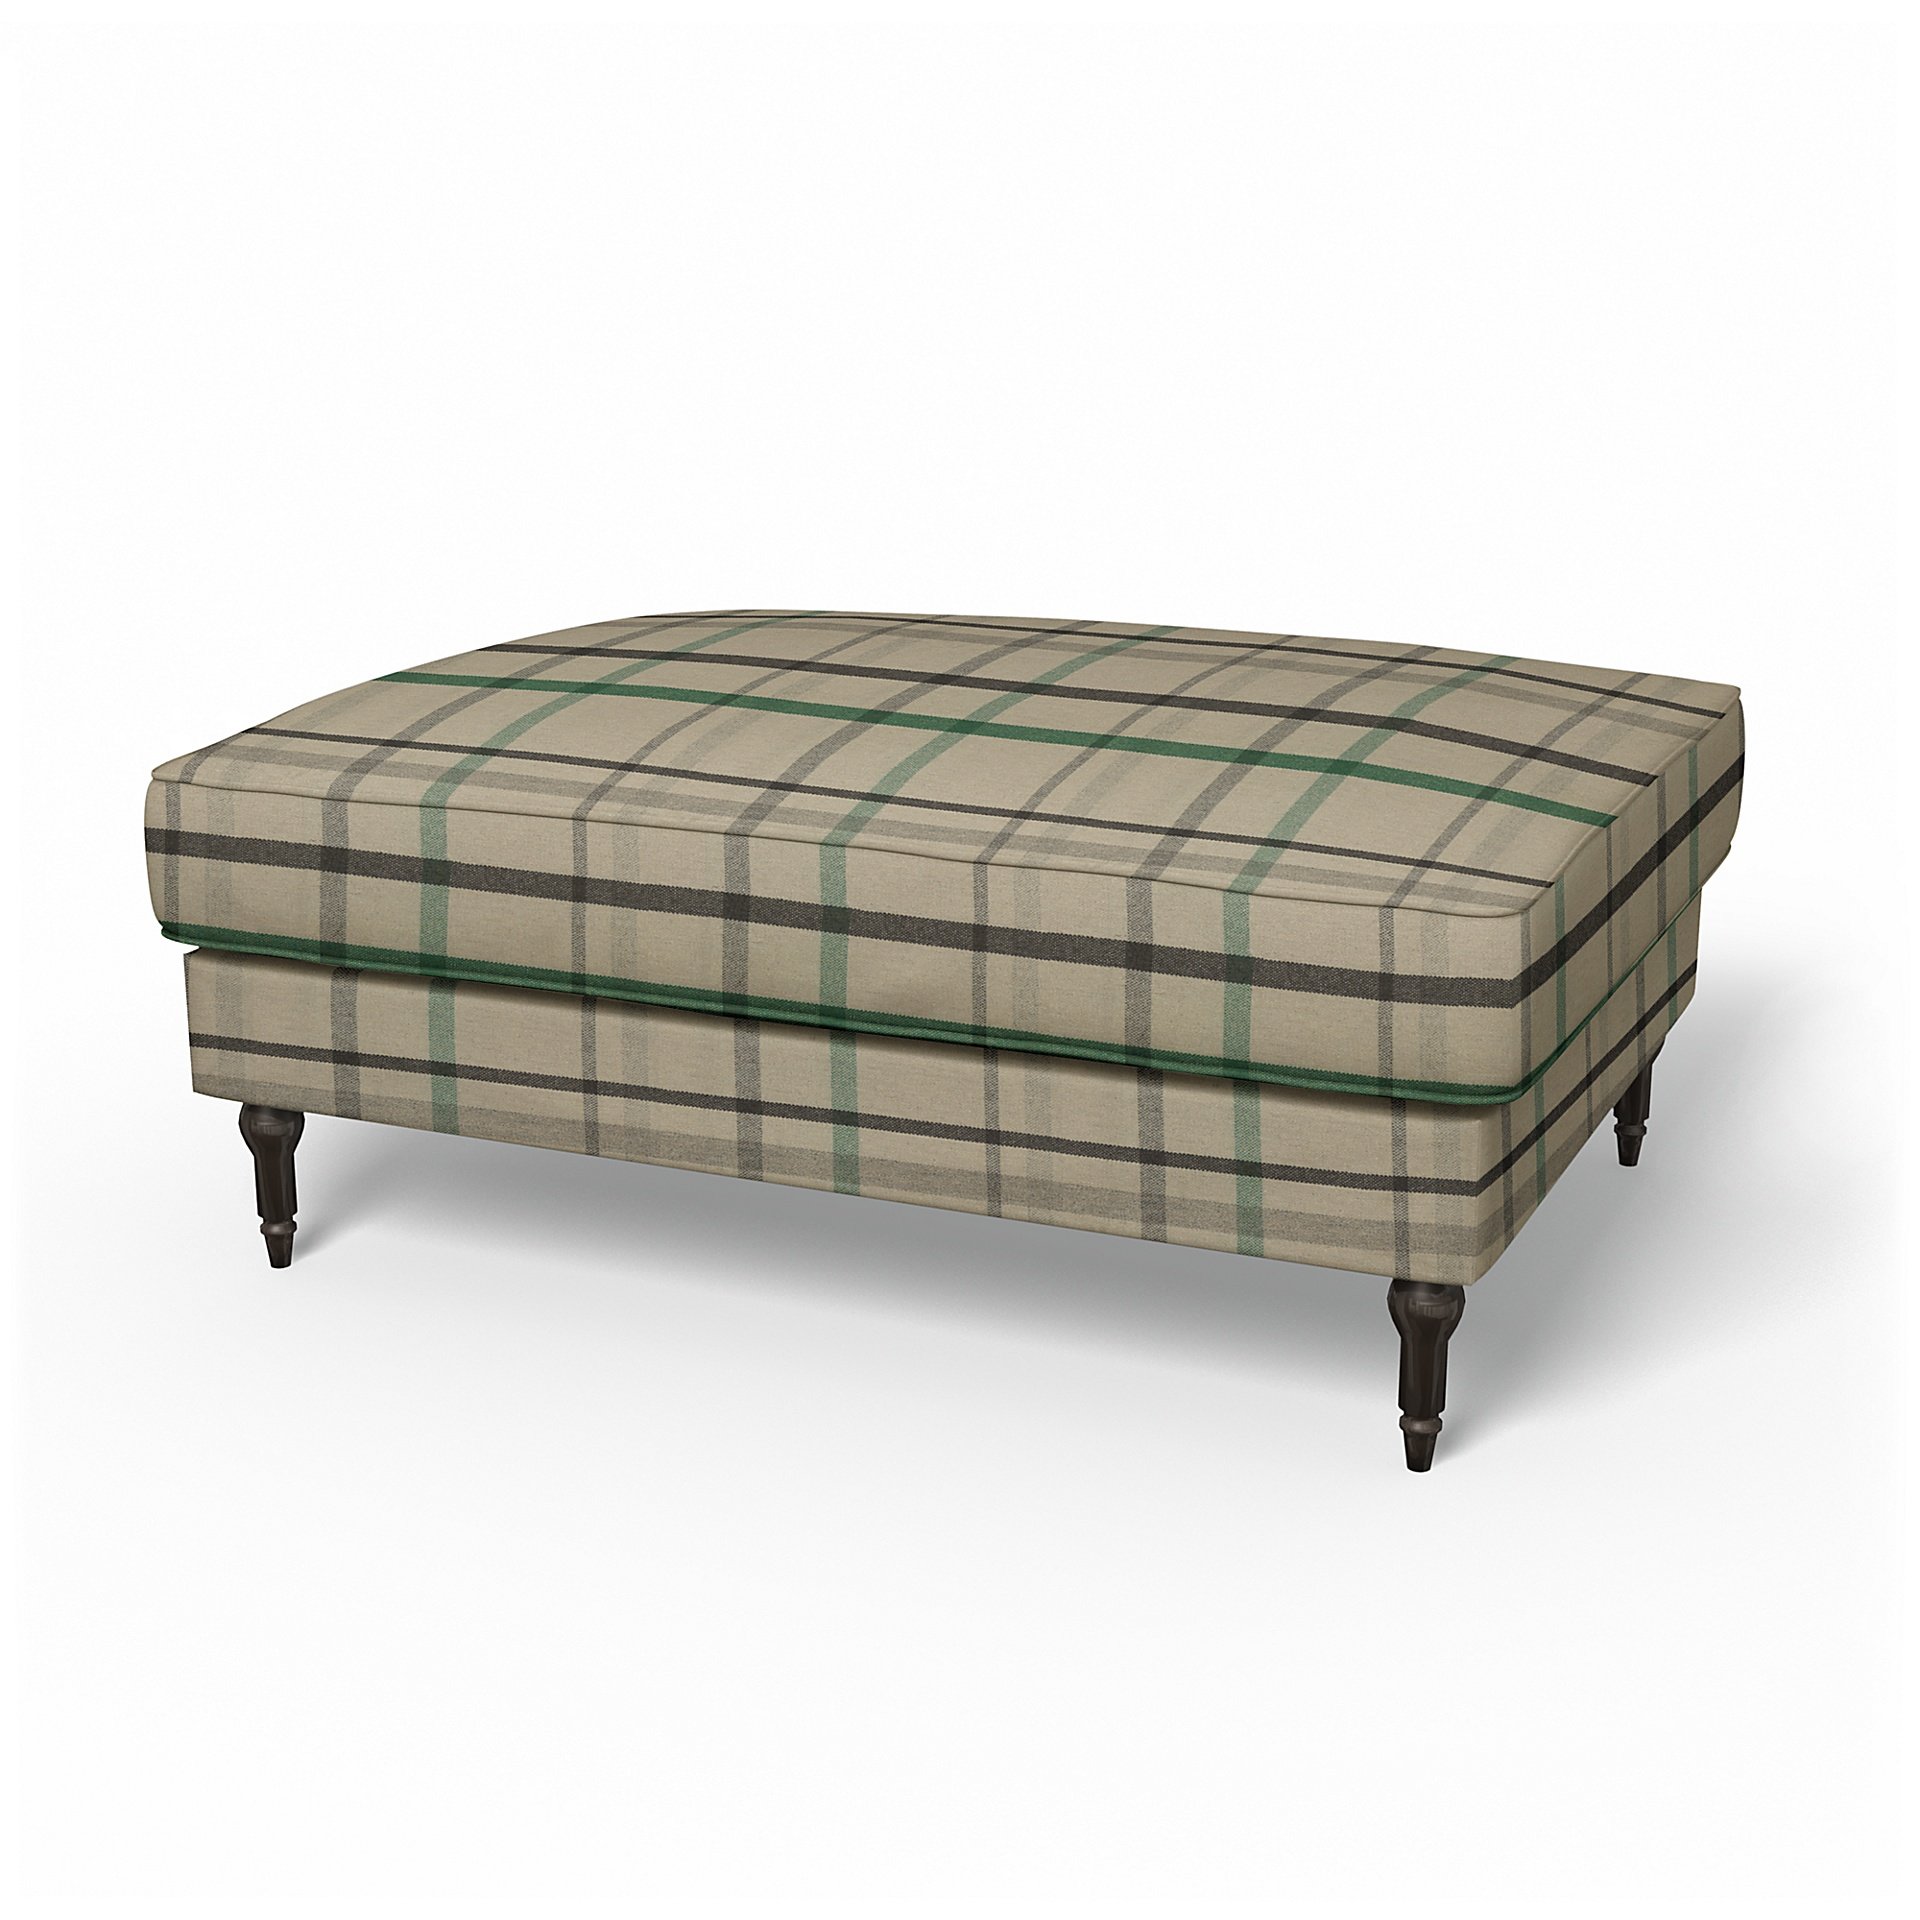 IKEA - Stocksund Footstool Cover, Forest Glade, Wool - Bemz